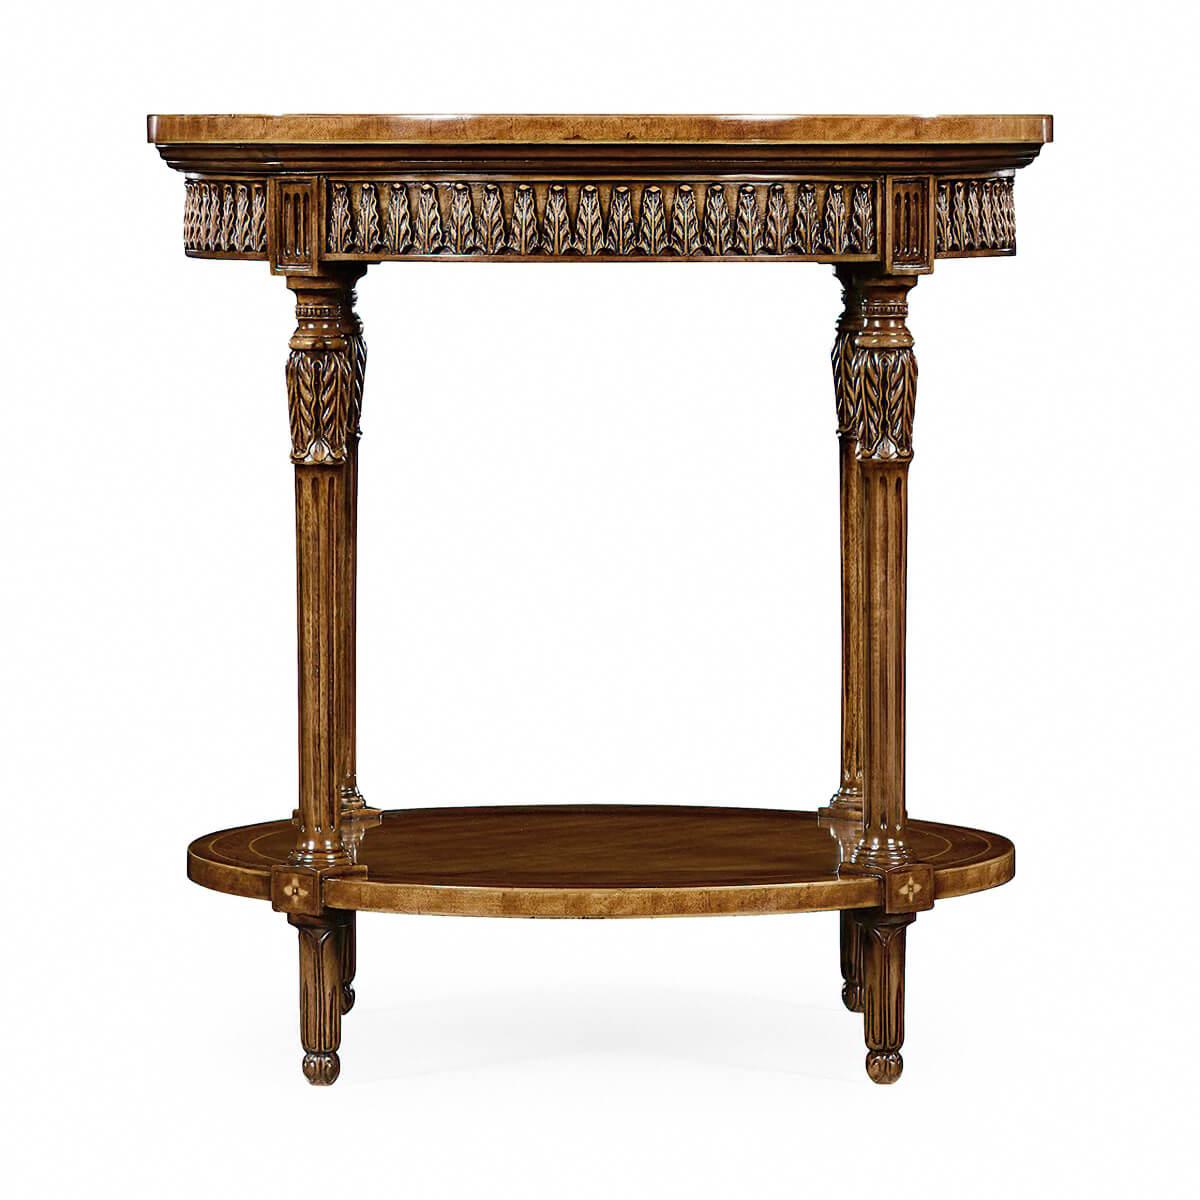 French Louis XVI style round end table with cross banded inlaid top, hand-carved acanthus leaf apron and acanthus wrapped turned, tapered and fluted legs. With an inlaid shelf stretcher base.

Dimensions: 24